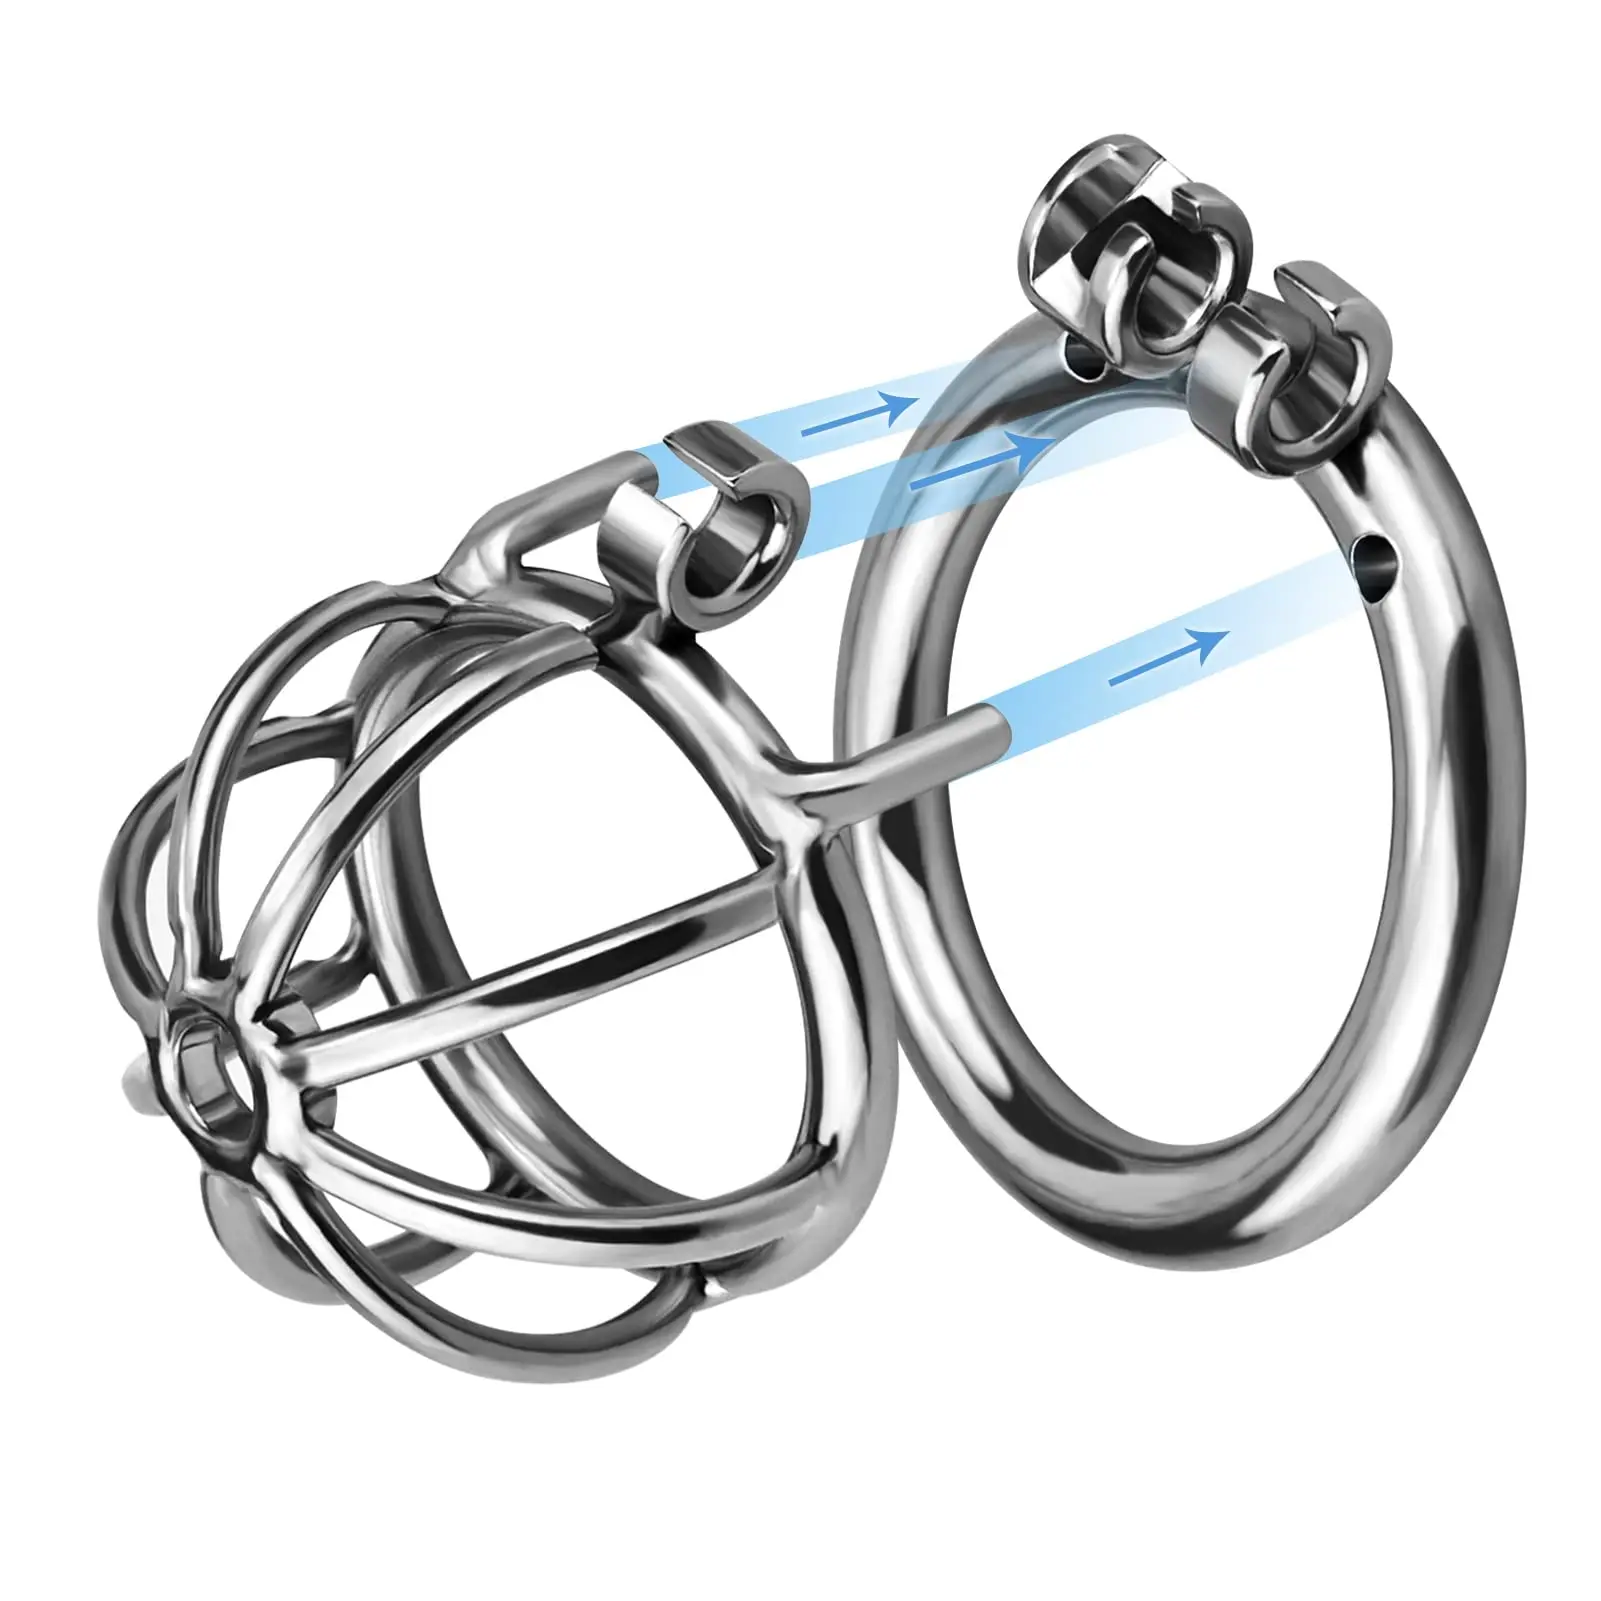 Sporting Super Small Stainless Steel Male Mature Cage Device Belt Home Ring Rest - £32.97 GBP